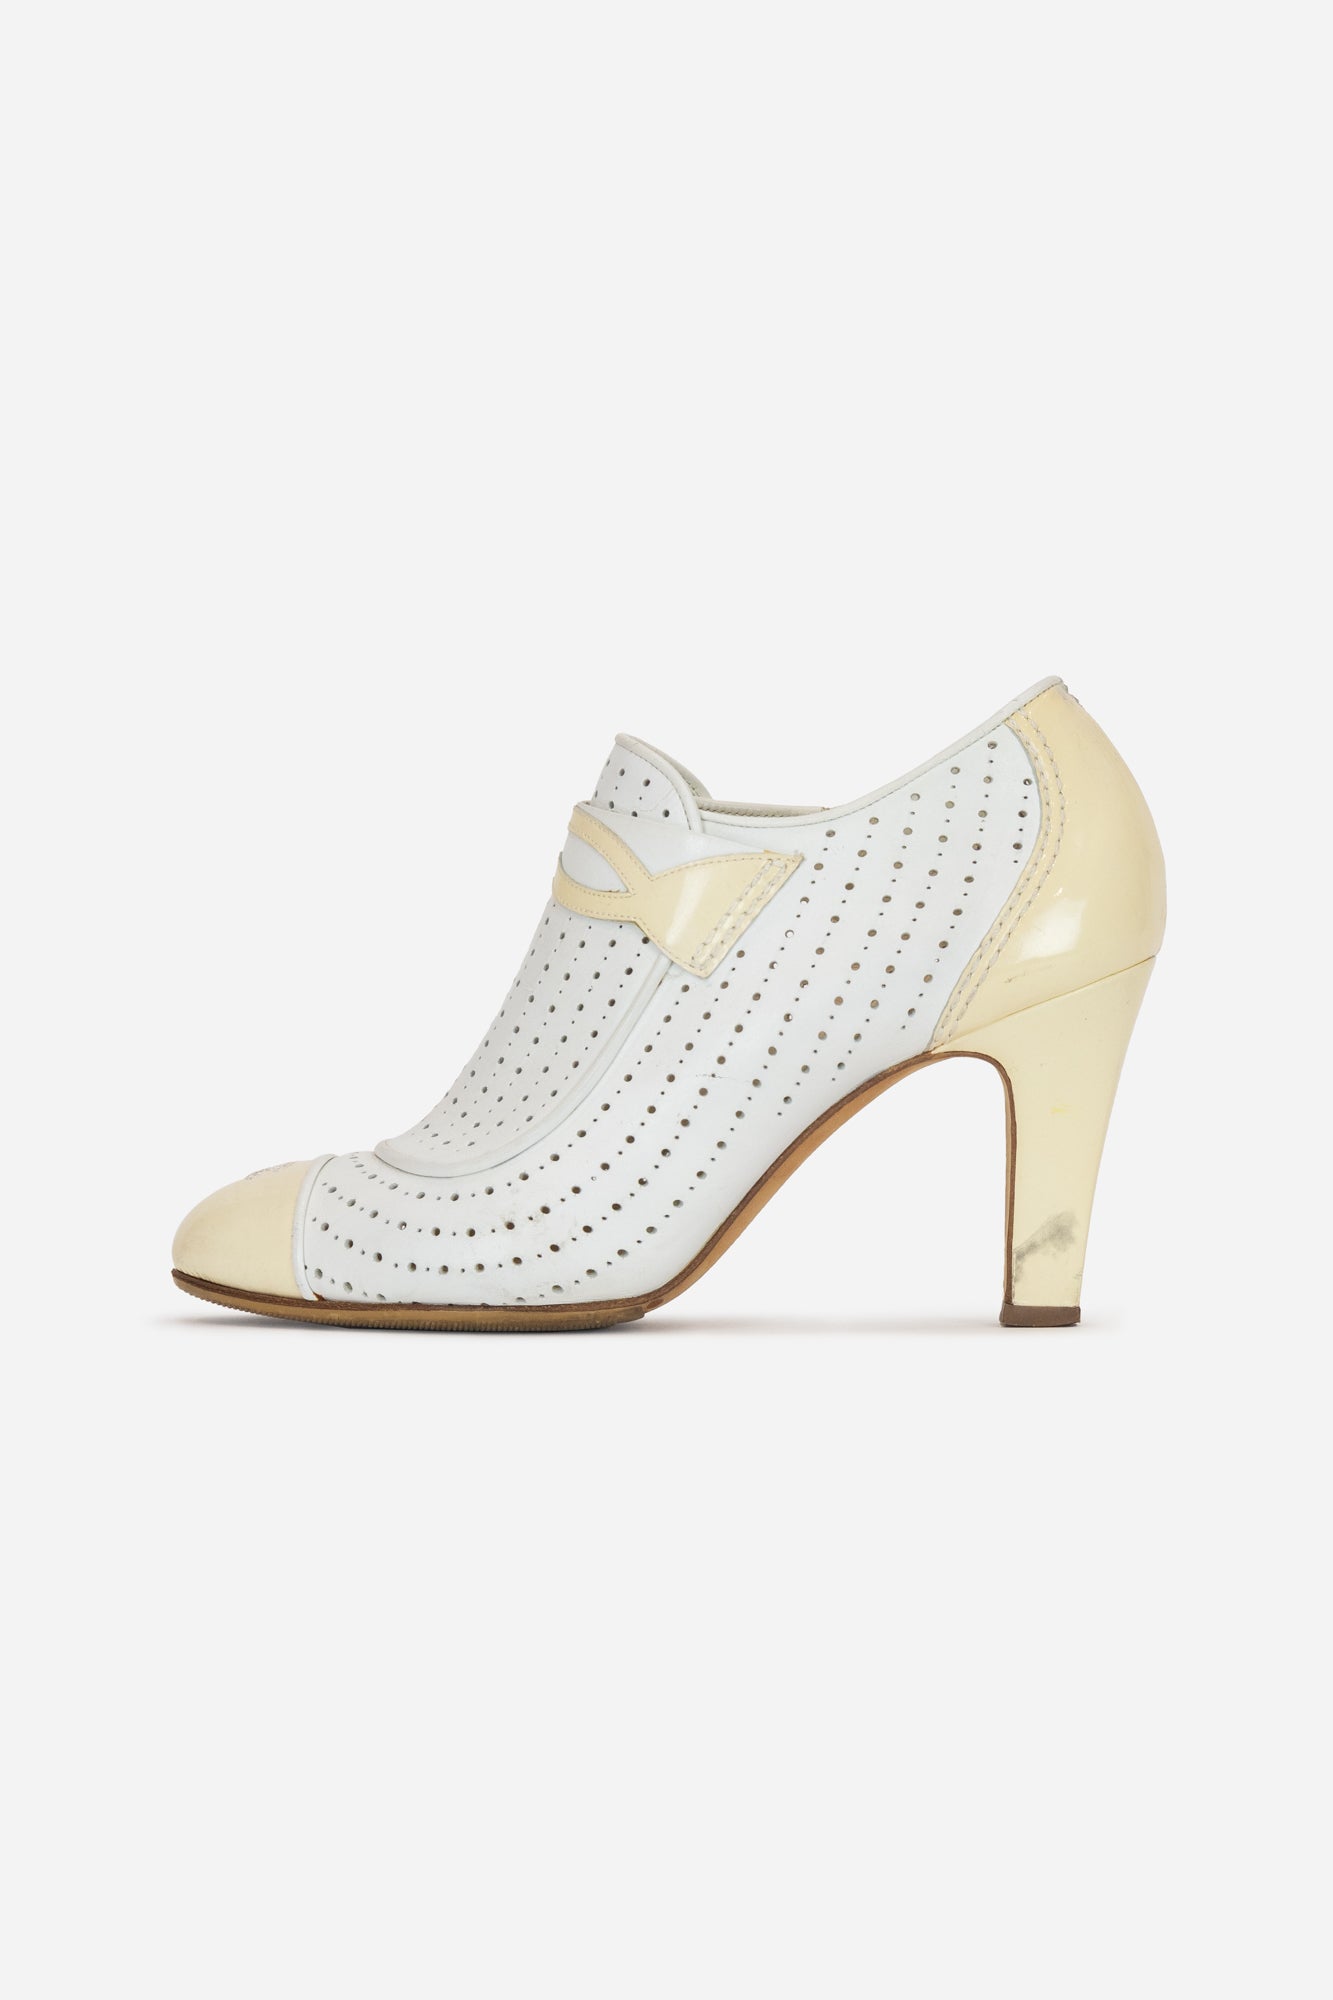 Vintage Leather White Perforated Leather Ankle Booties